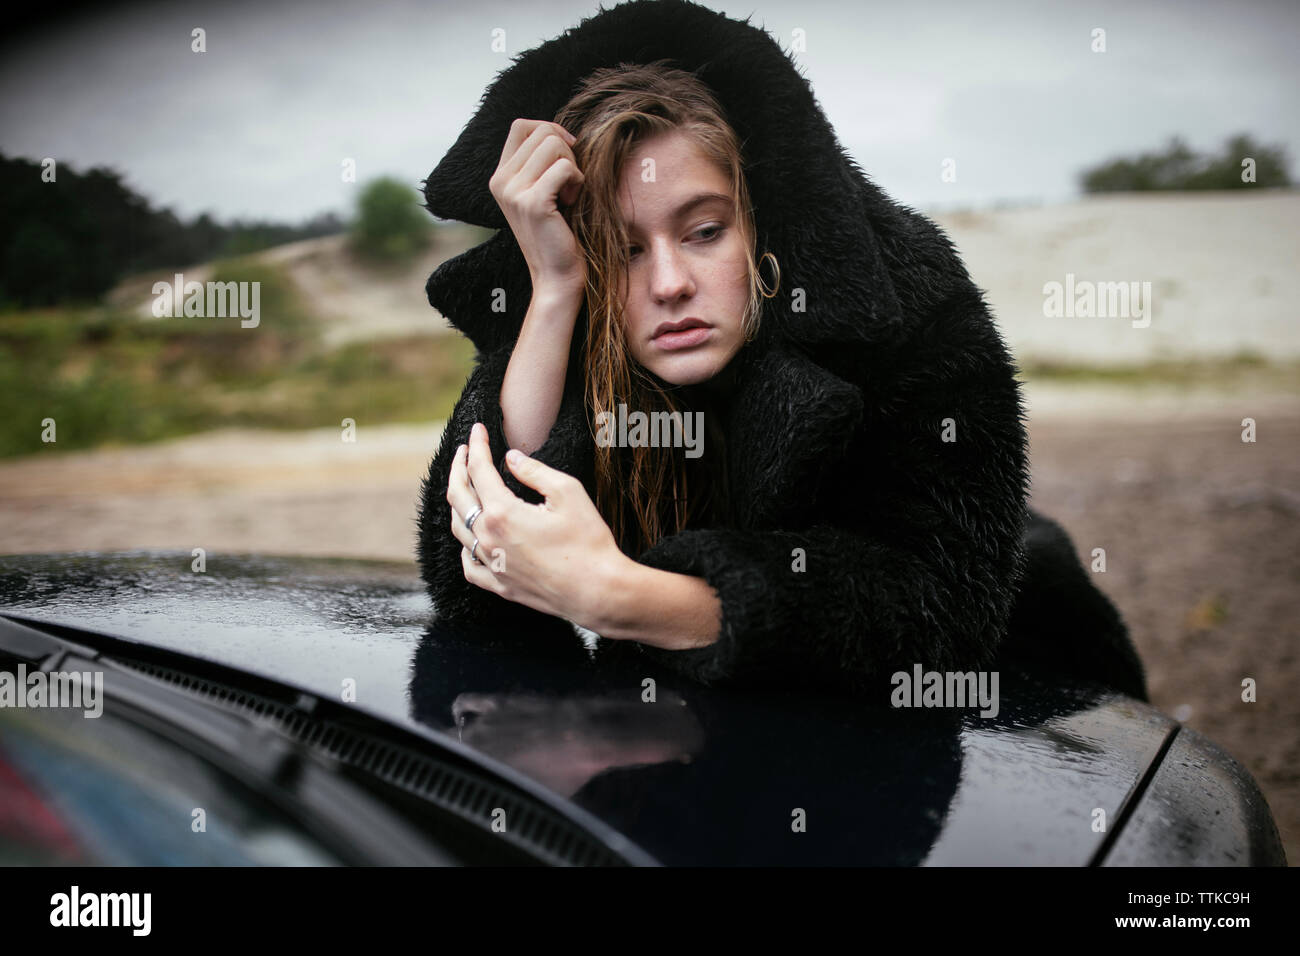 wet woman on the hood of a car Stock Photo